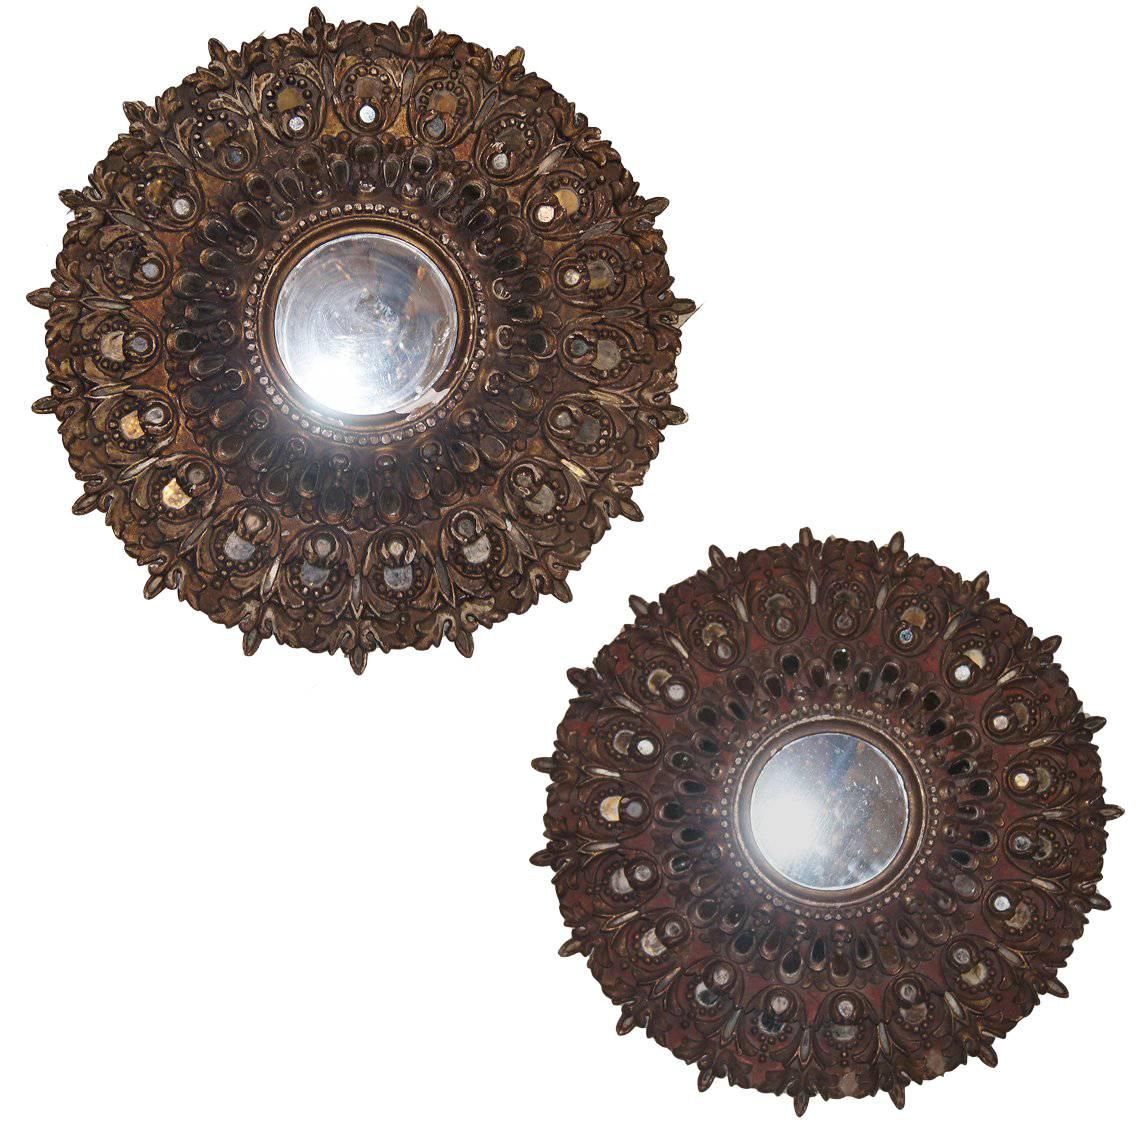 Pair of Carved Giltwood Sunburst Mirrors. Sold individually